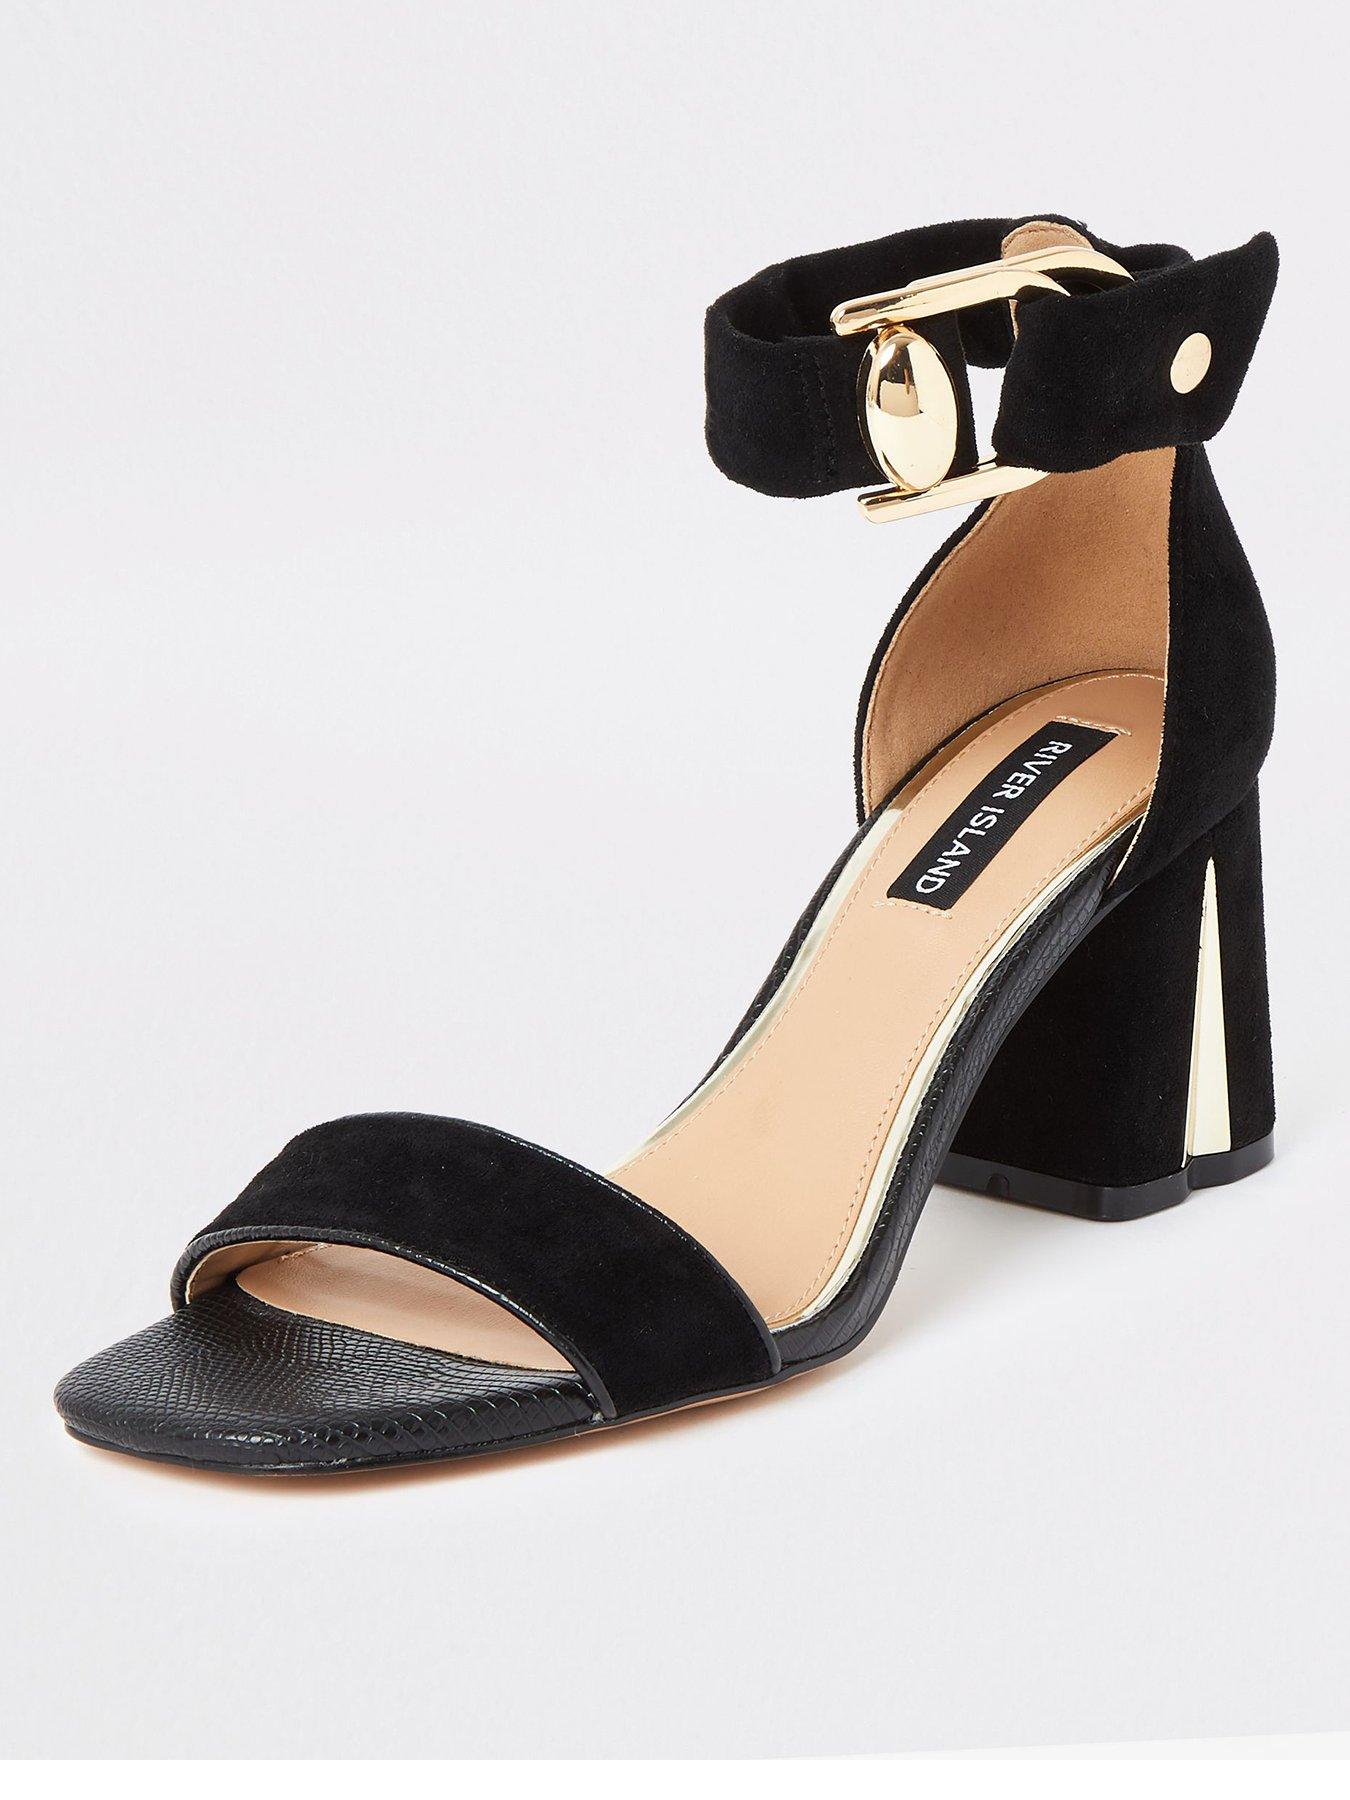 River Island Buckle Sandals Discount, 57% OFF | www.hcb.cat